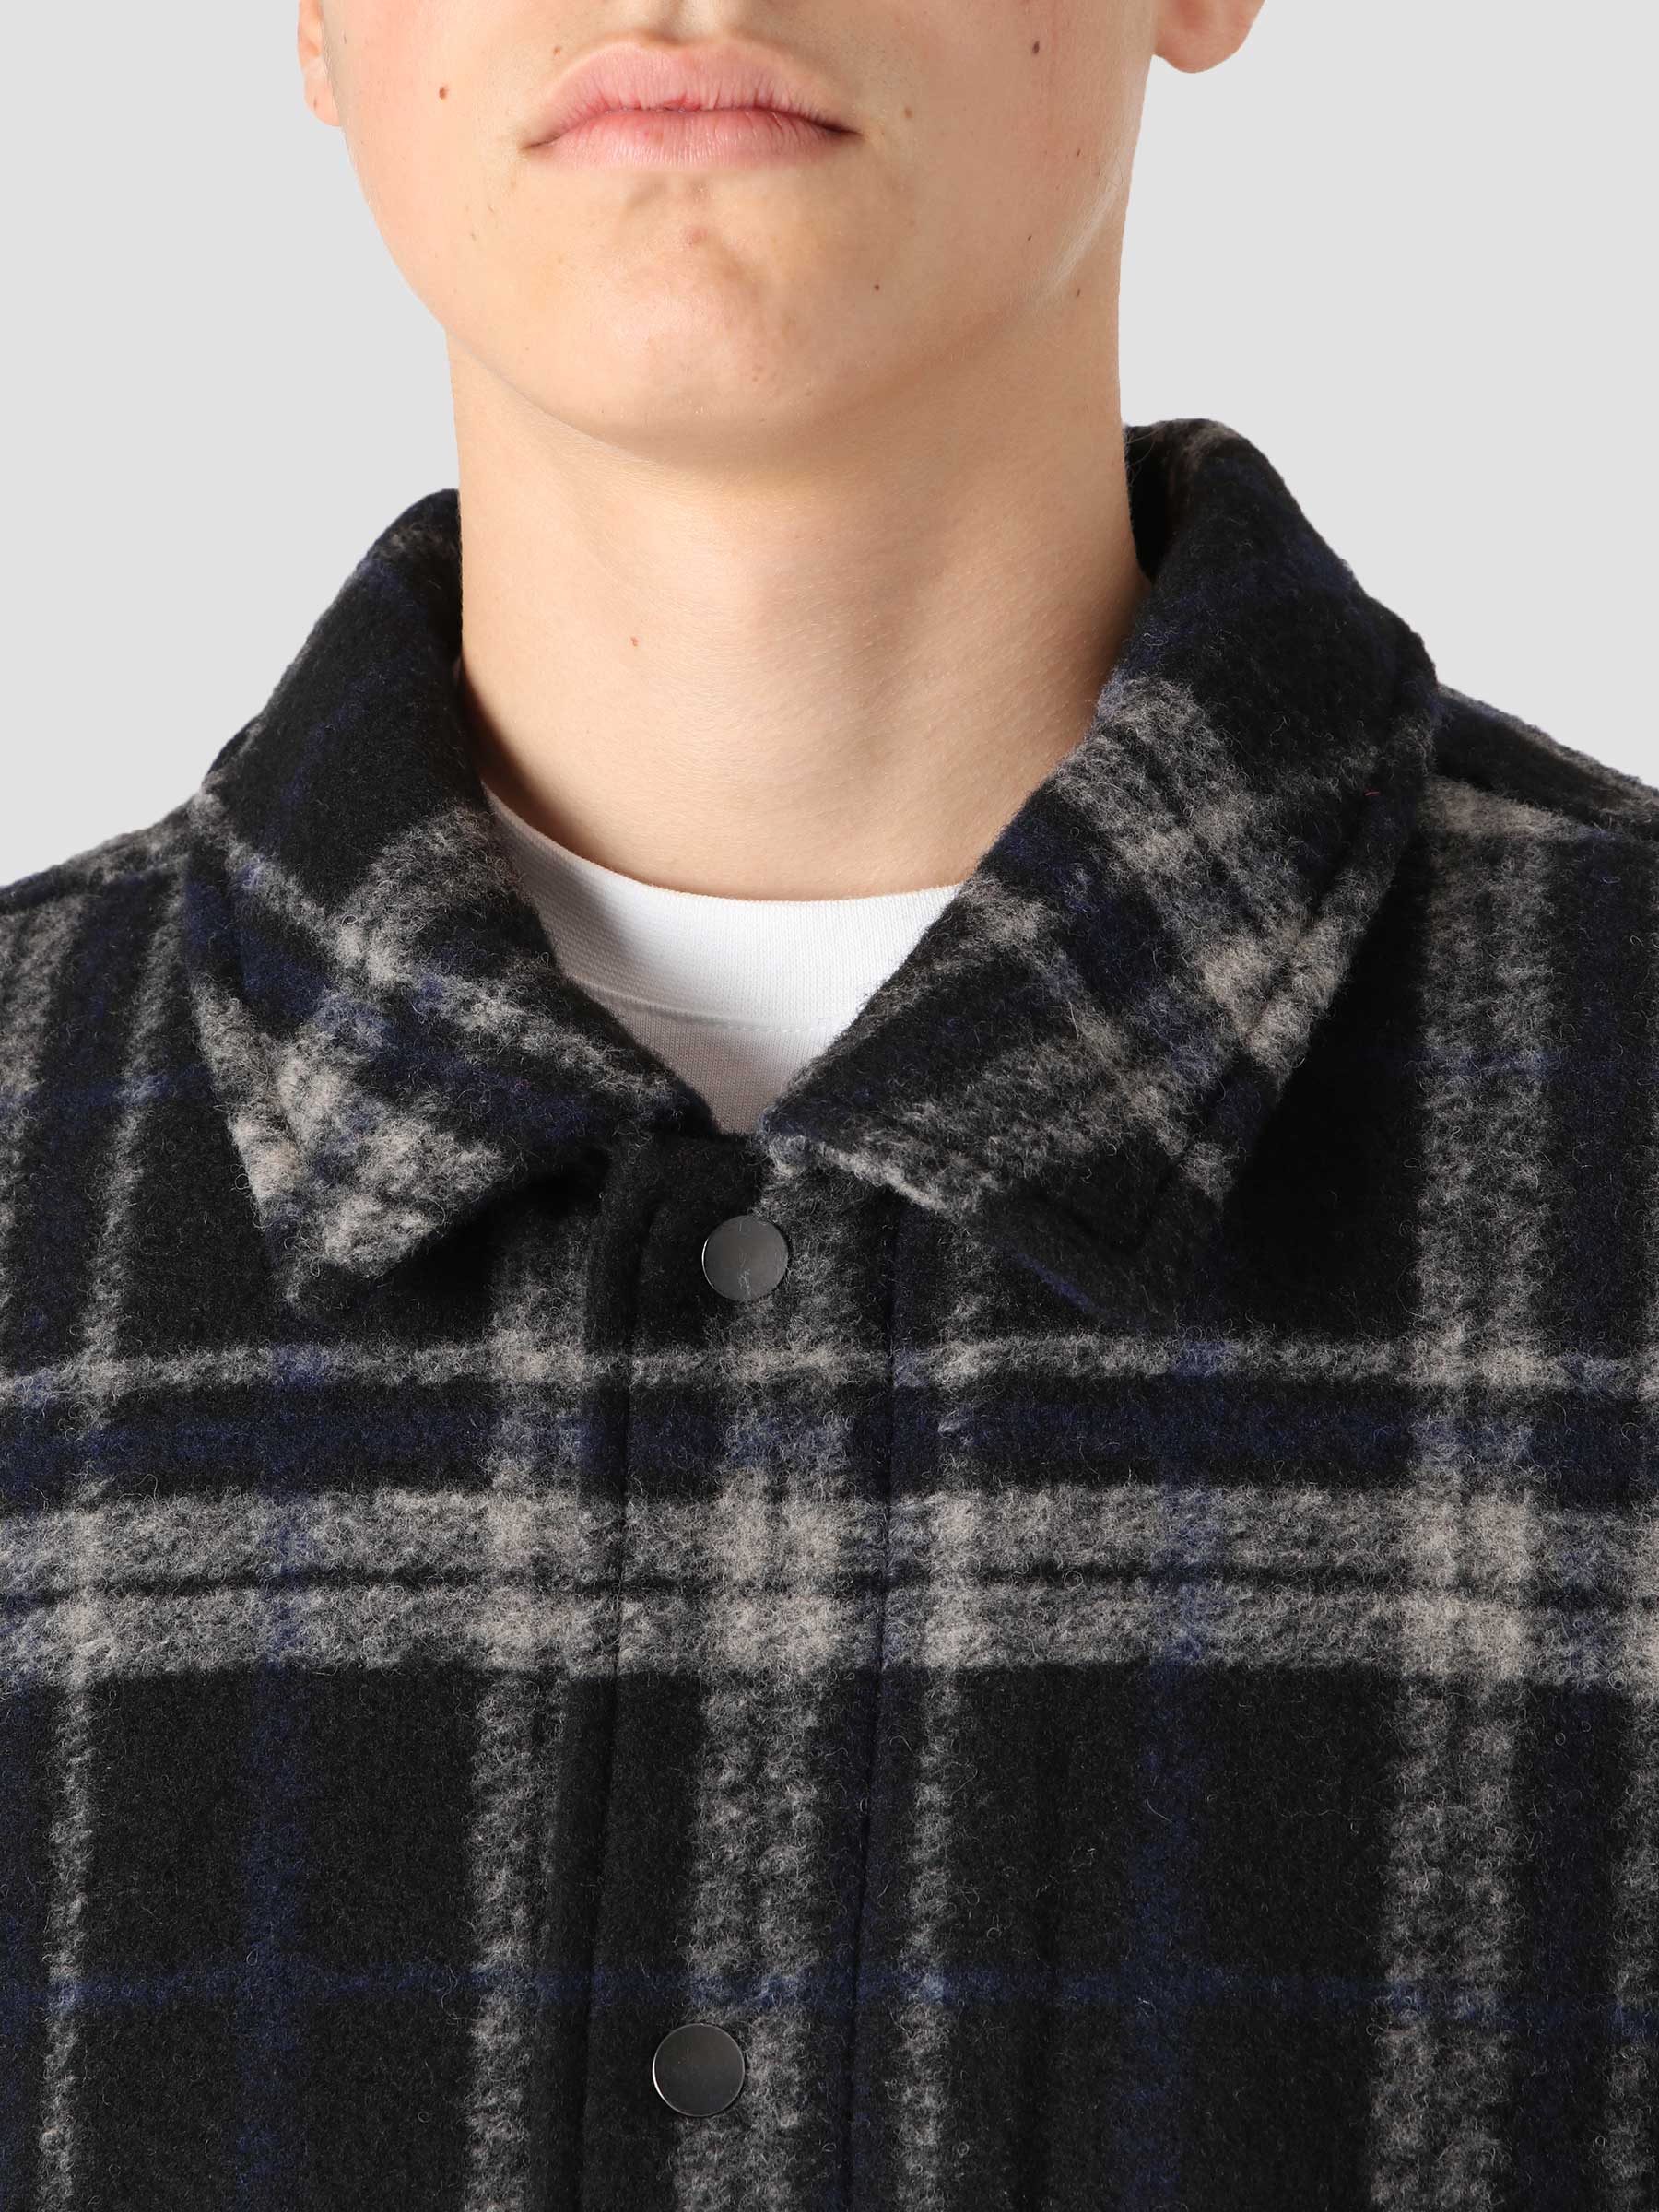 QB401 Checked Worker Jacket